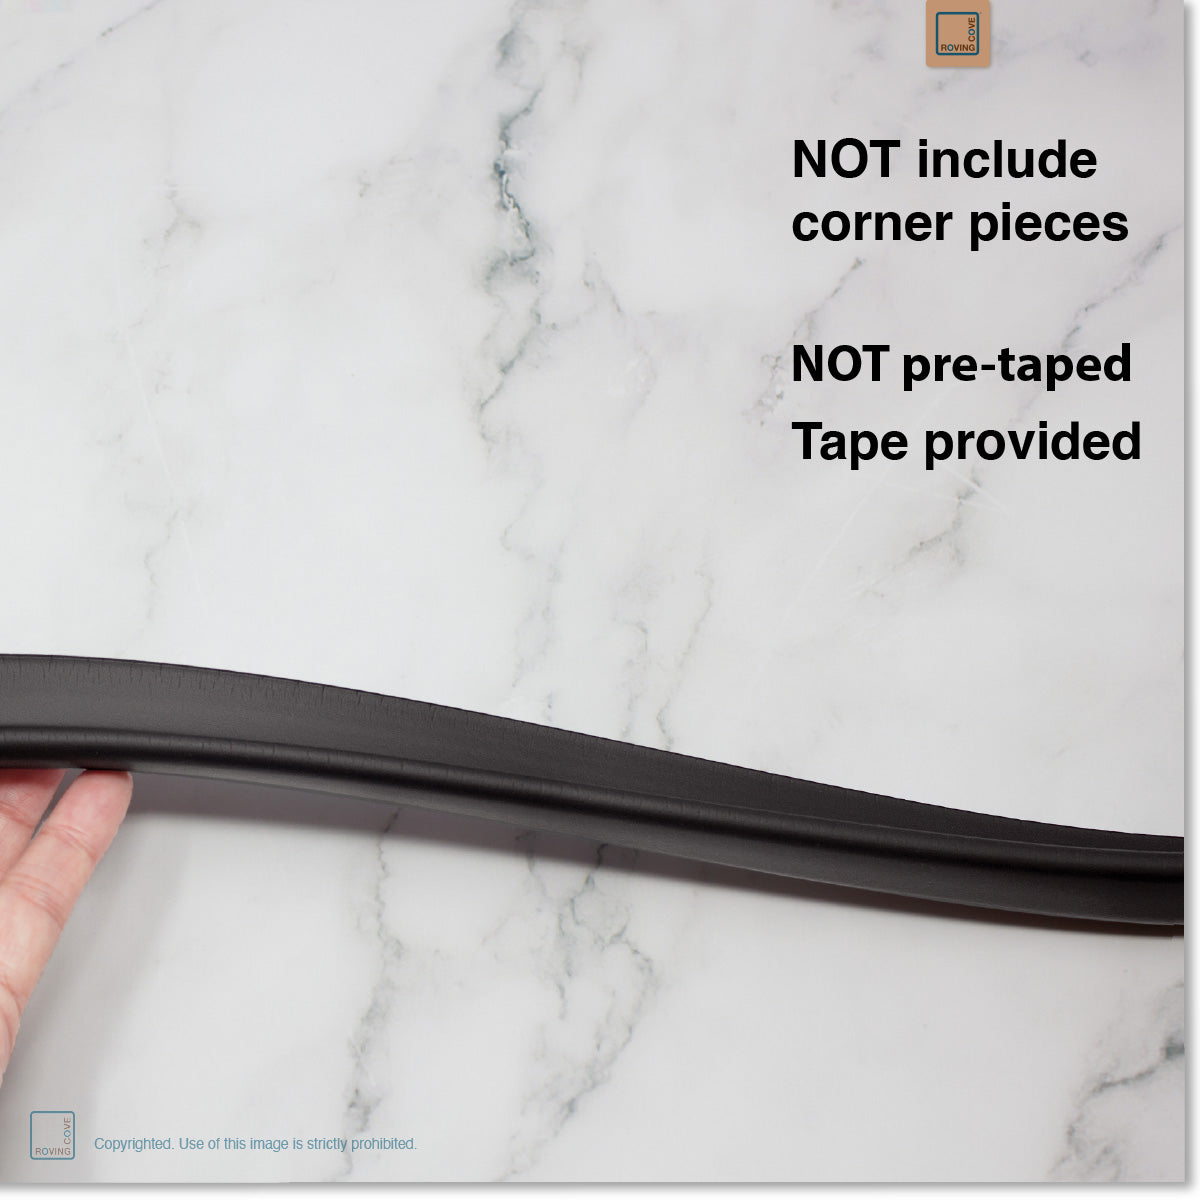 Roving Cove Edge and Corner Protector for Baby Proofing. Soft NBR Rubber Foam. Furniture and Fireplace Safety Corner Edge Bumper Guard, 3M Adhesive. Protect you and your loved ones from dangerous sharp edge and corners of fireplace, hearths, tables, desks, shelves, bed frames, and other furniture in your home.